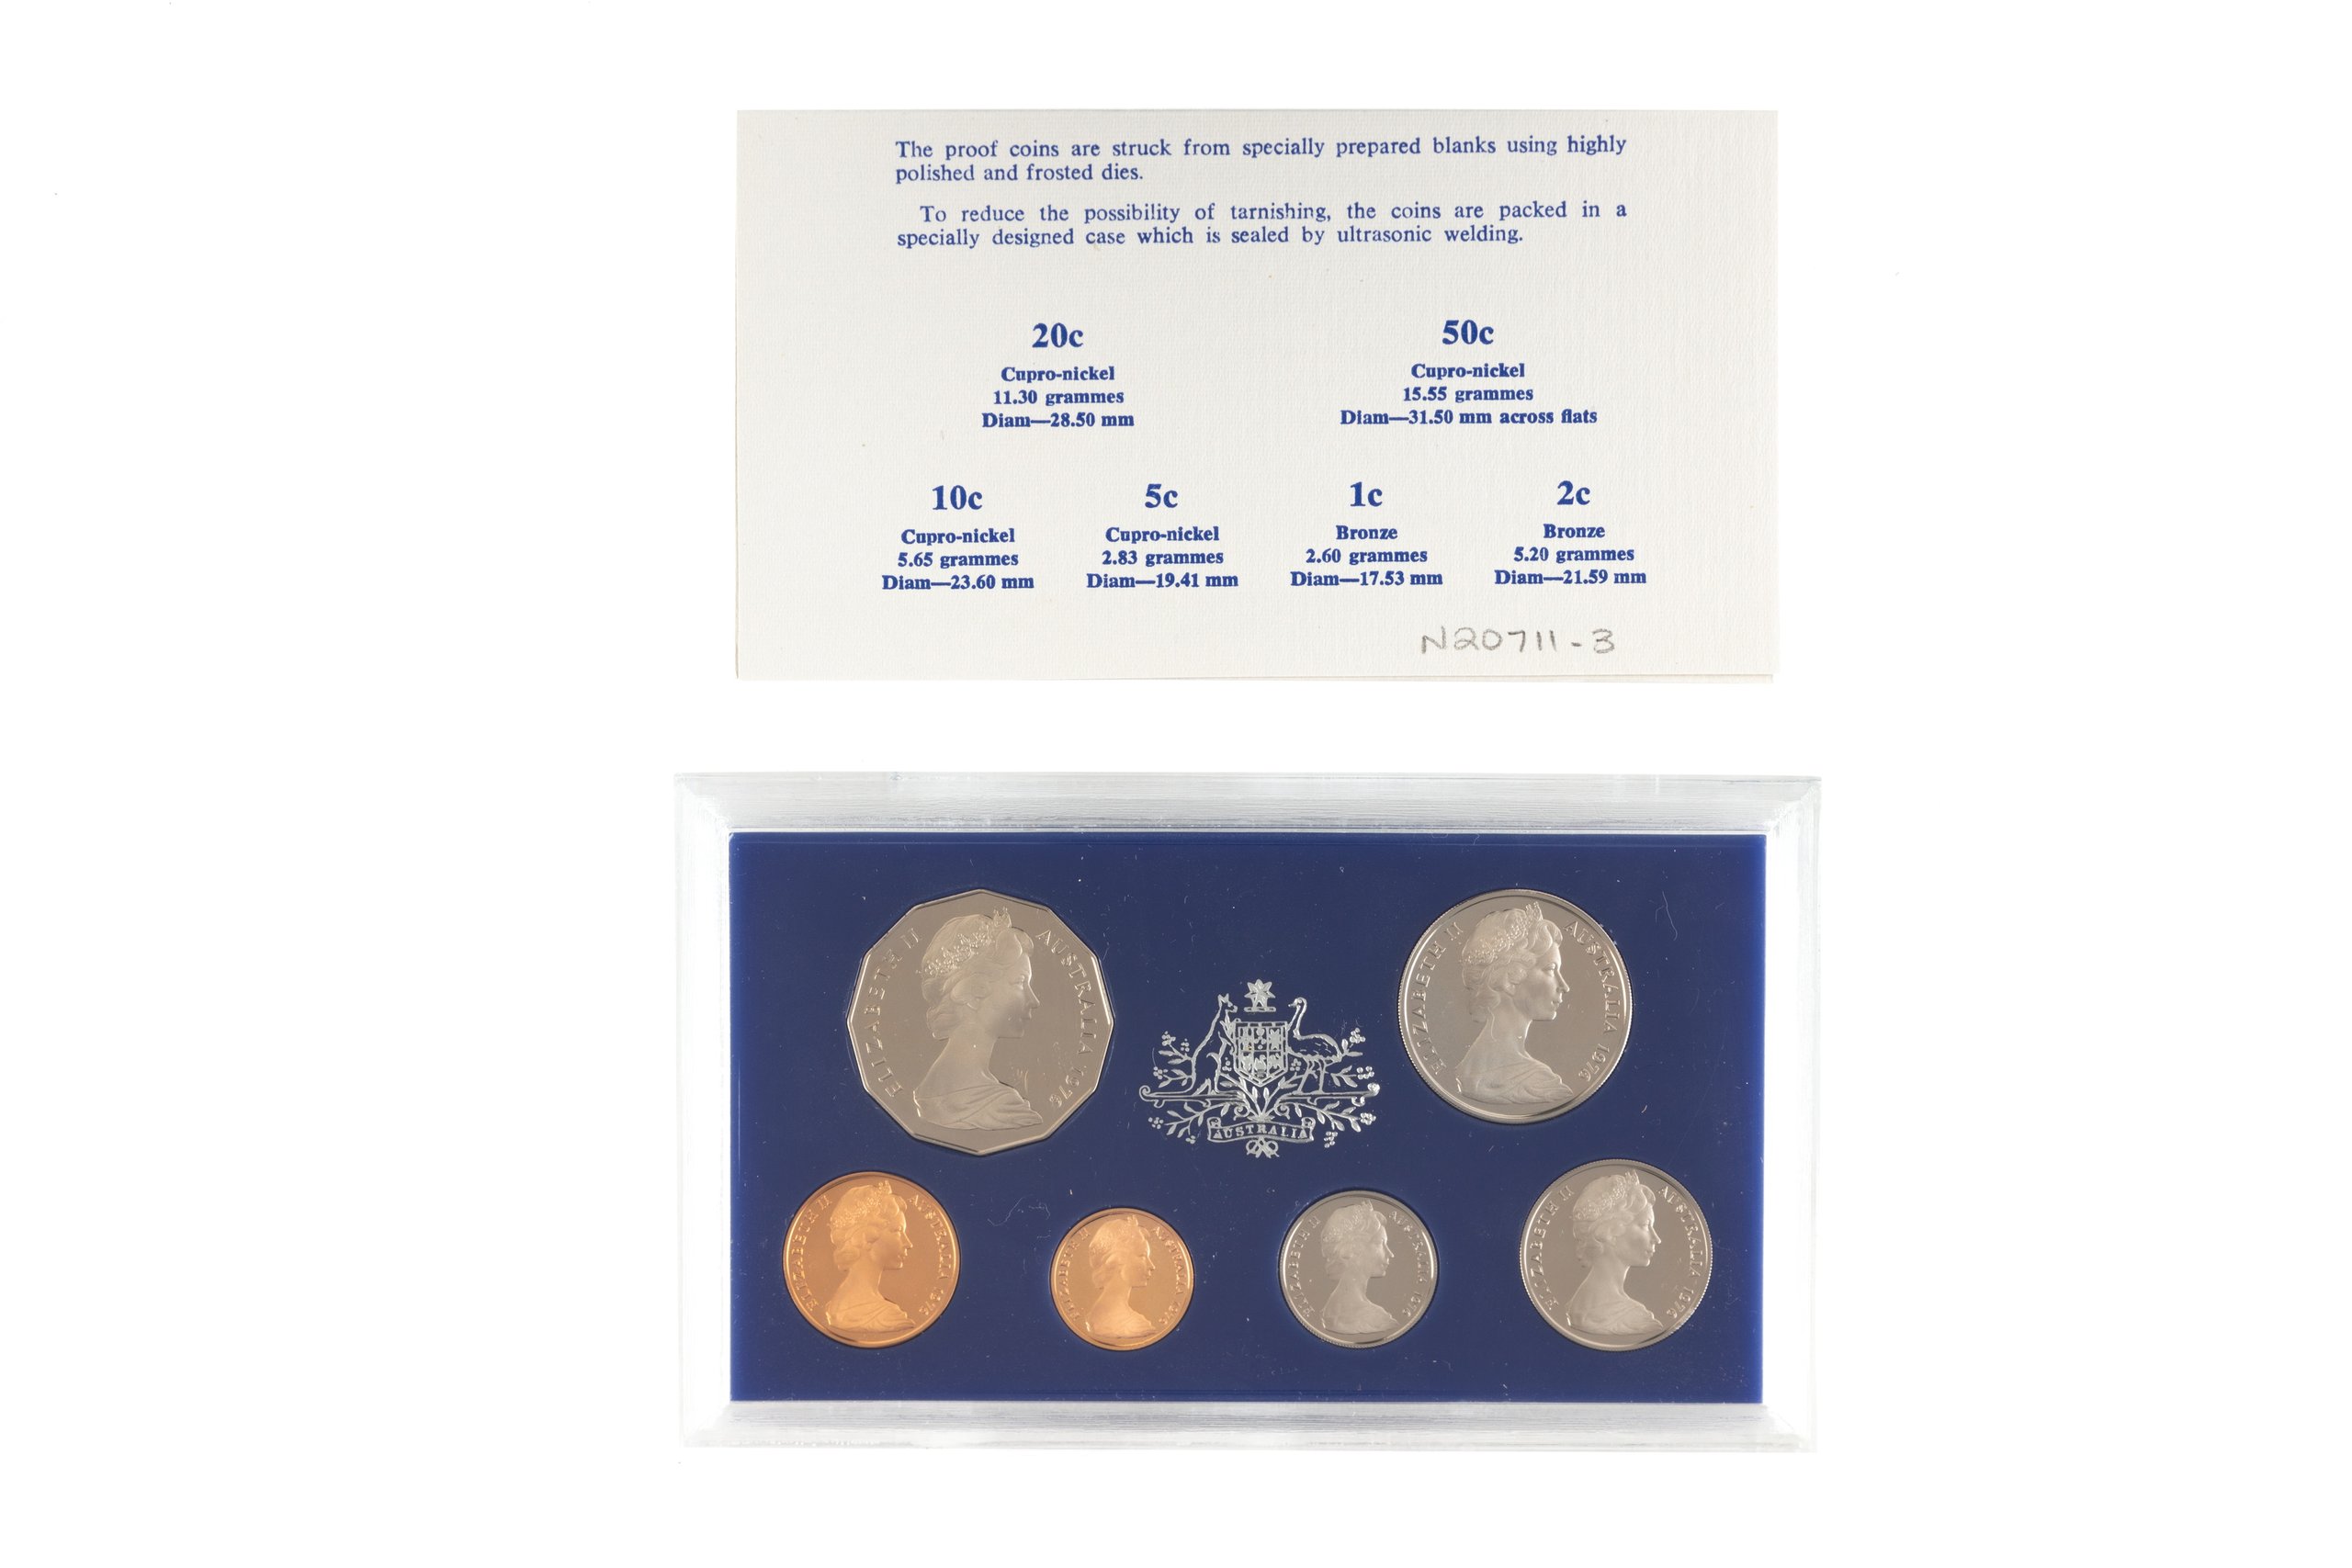 Australian Fifty Cent proof coin in case with booklet